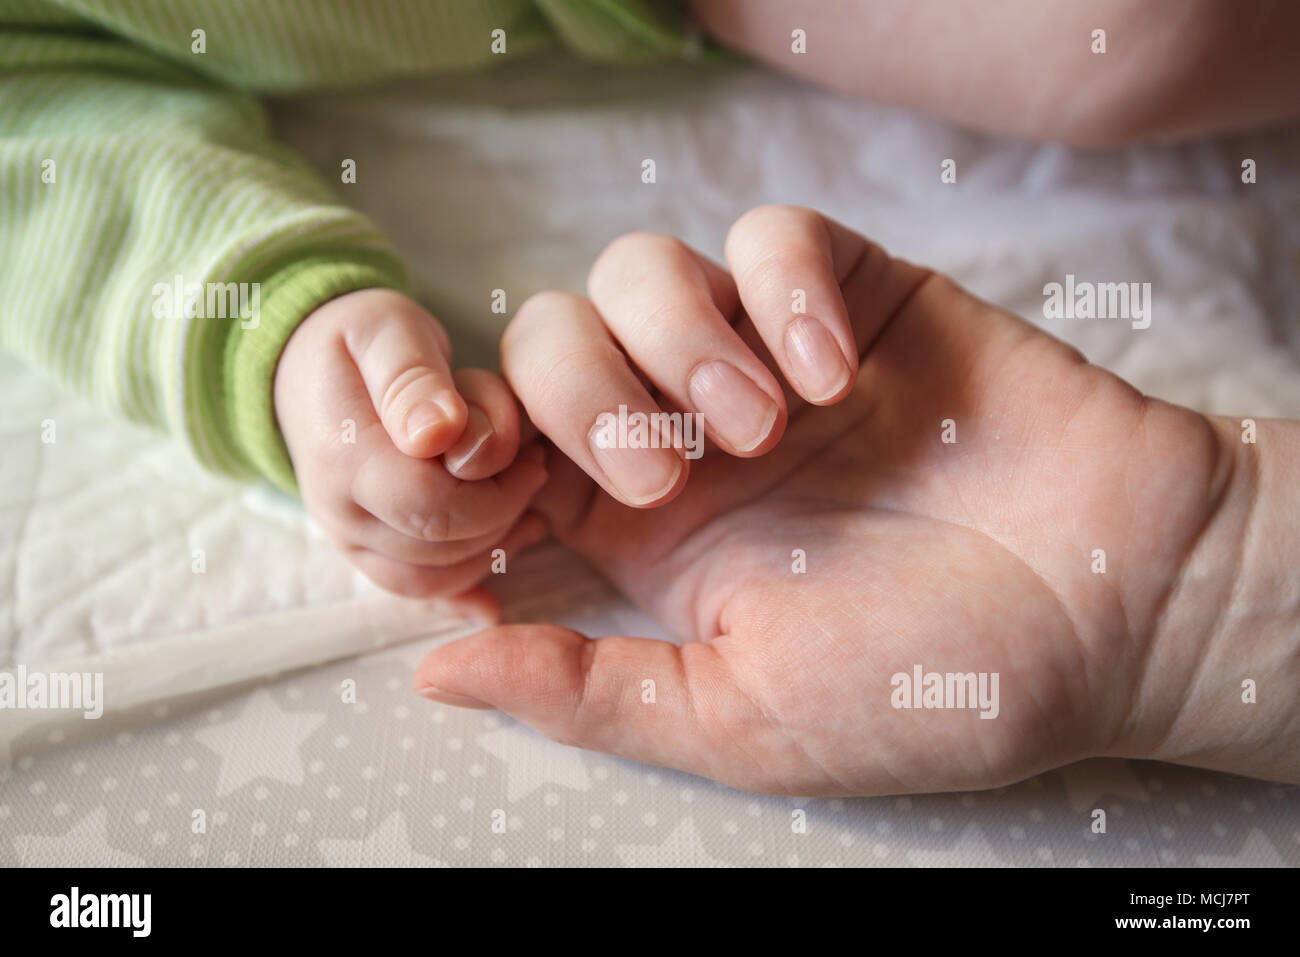 Mother touching baby's hand, close up with selective focus Stock Photo